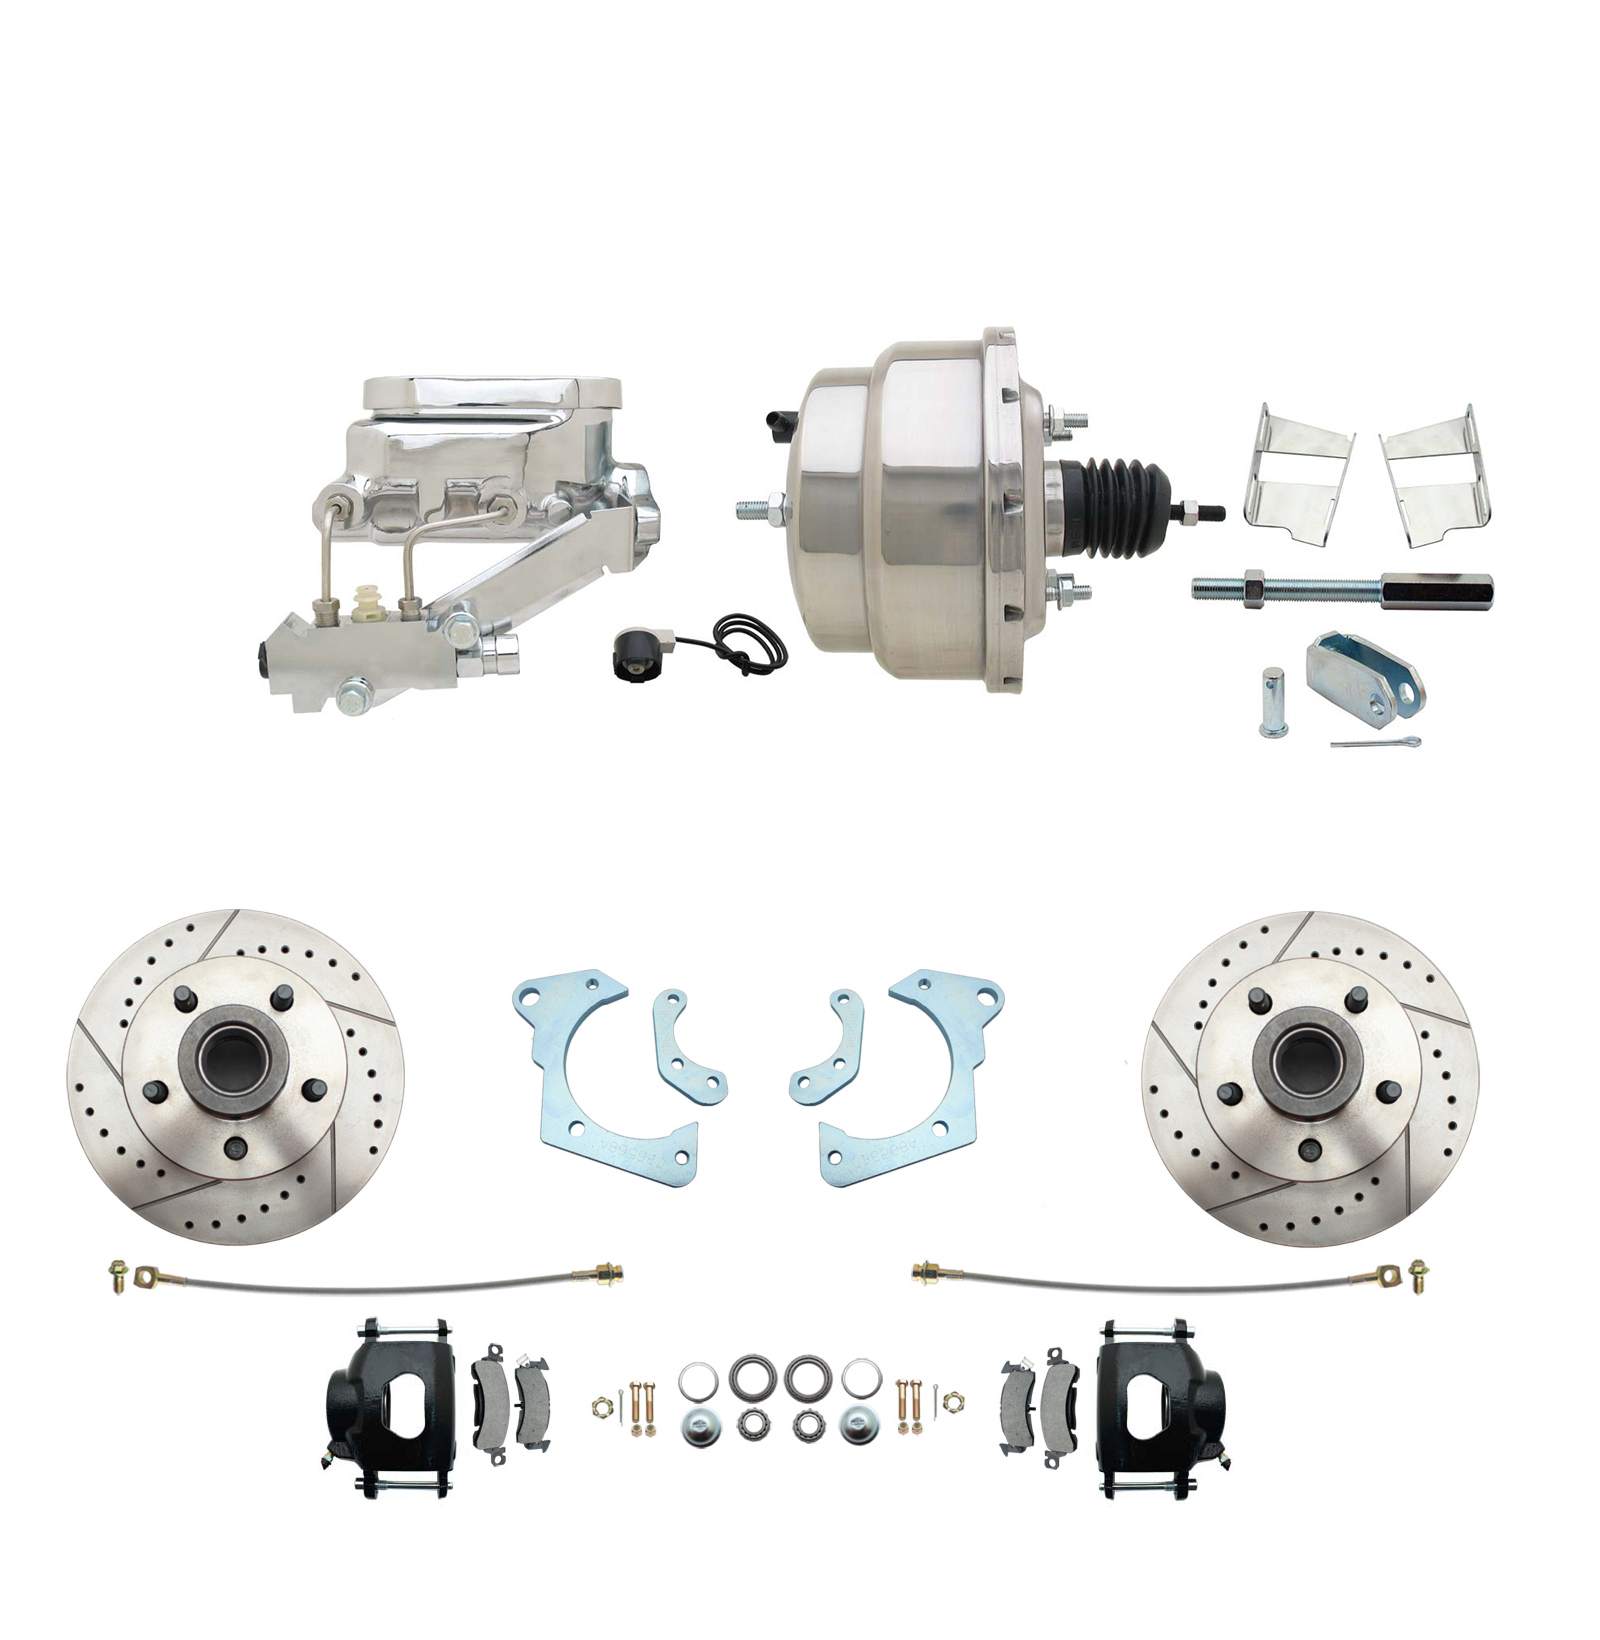 1965-1968 GM Full Size Front Disc Brake Kit Black Powder Coated Calipers Drilled/Slotted Rotors (Impala, Bel Air, Biscayne) & 8 Dual Stainless Steel Booster Conversion Kit W/ Chrome Flat Top Master Cylinder Left Mount Disc/ D